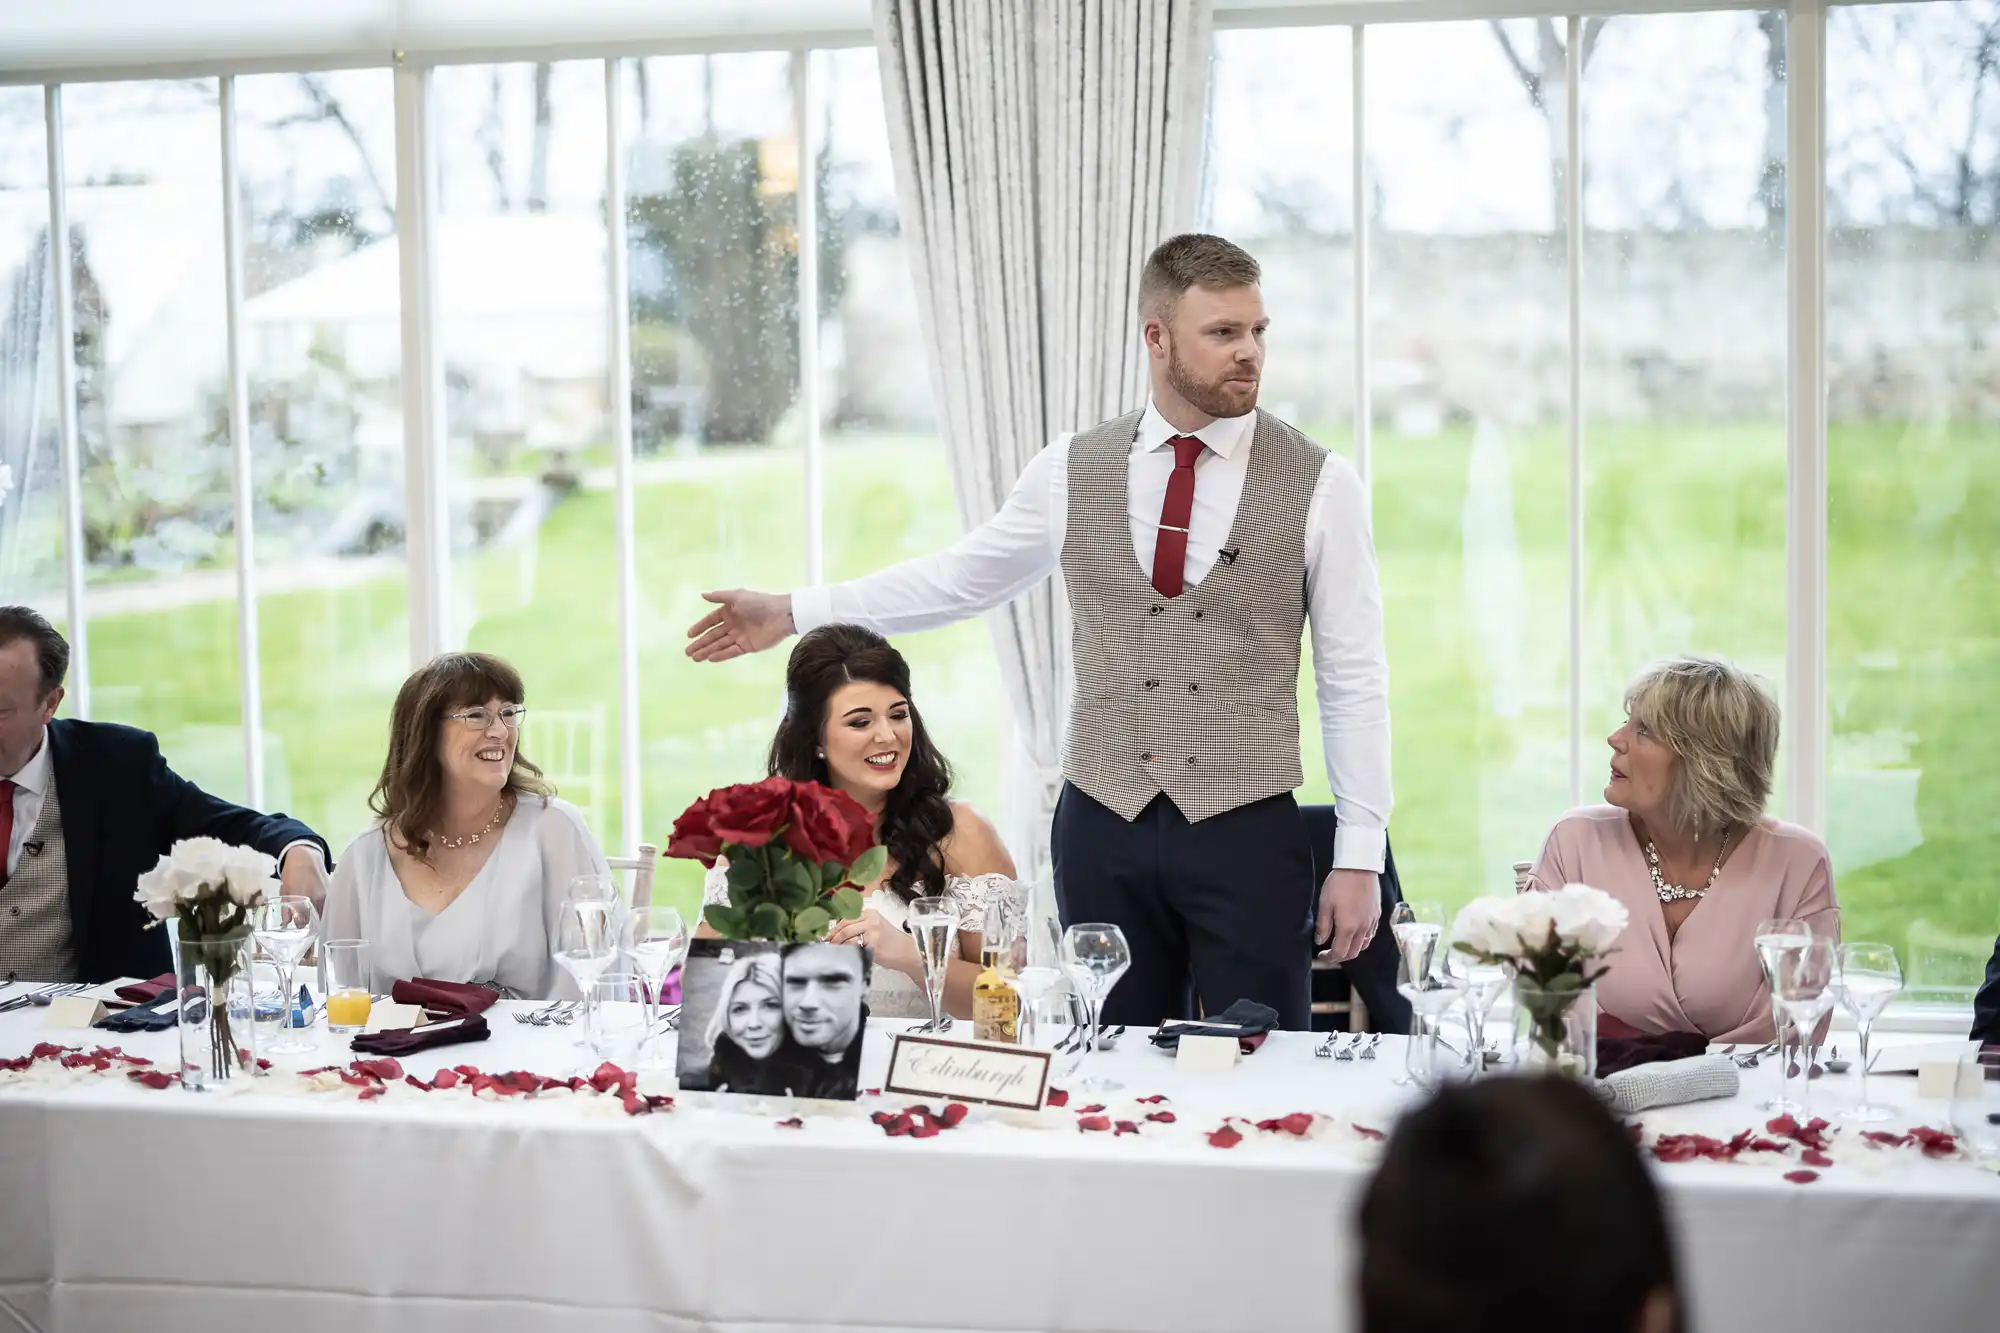 A man in a vest and tie gives a speech at a table set for a formal event. Three women and another man are seated, listening and smiling. The table is decorated with flowers and framed photos.